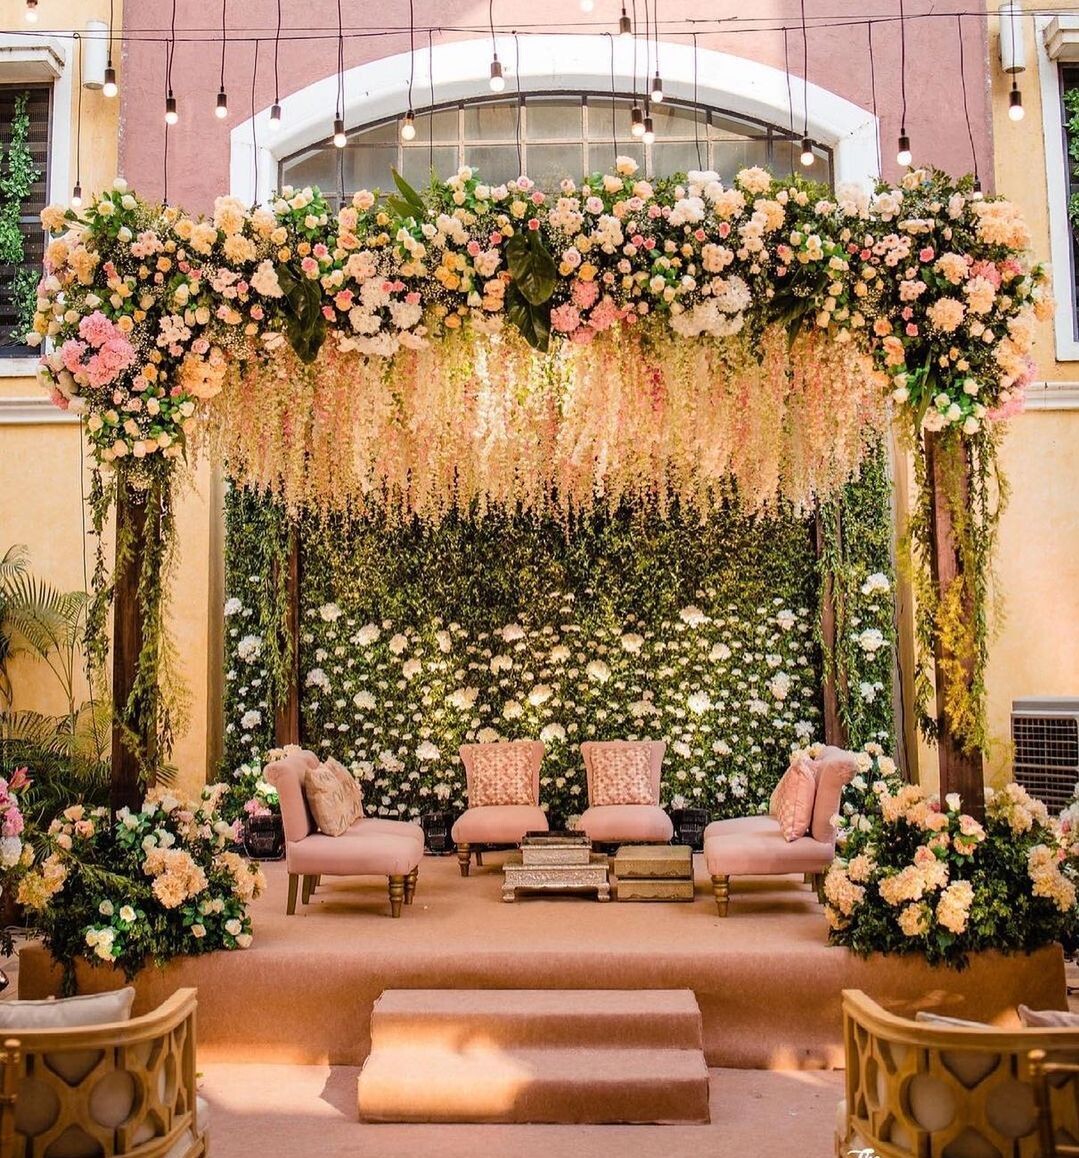 Top 10 Engagement Stage Decoration Ideas for the Most Memorable Start